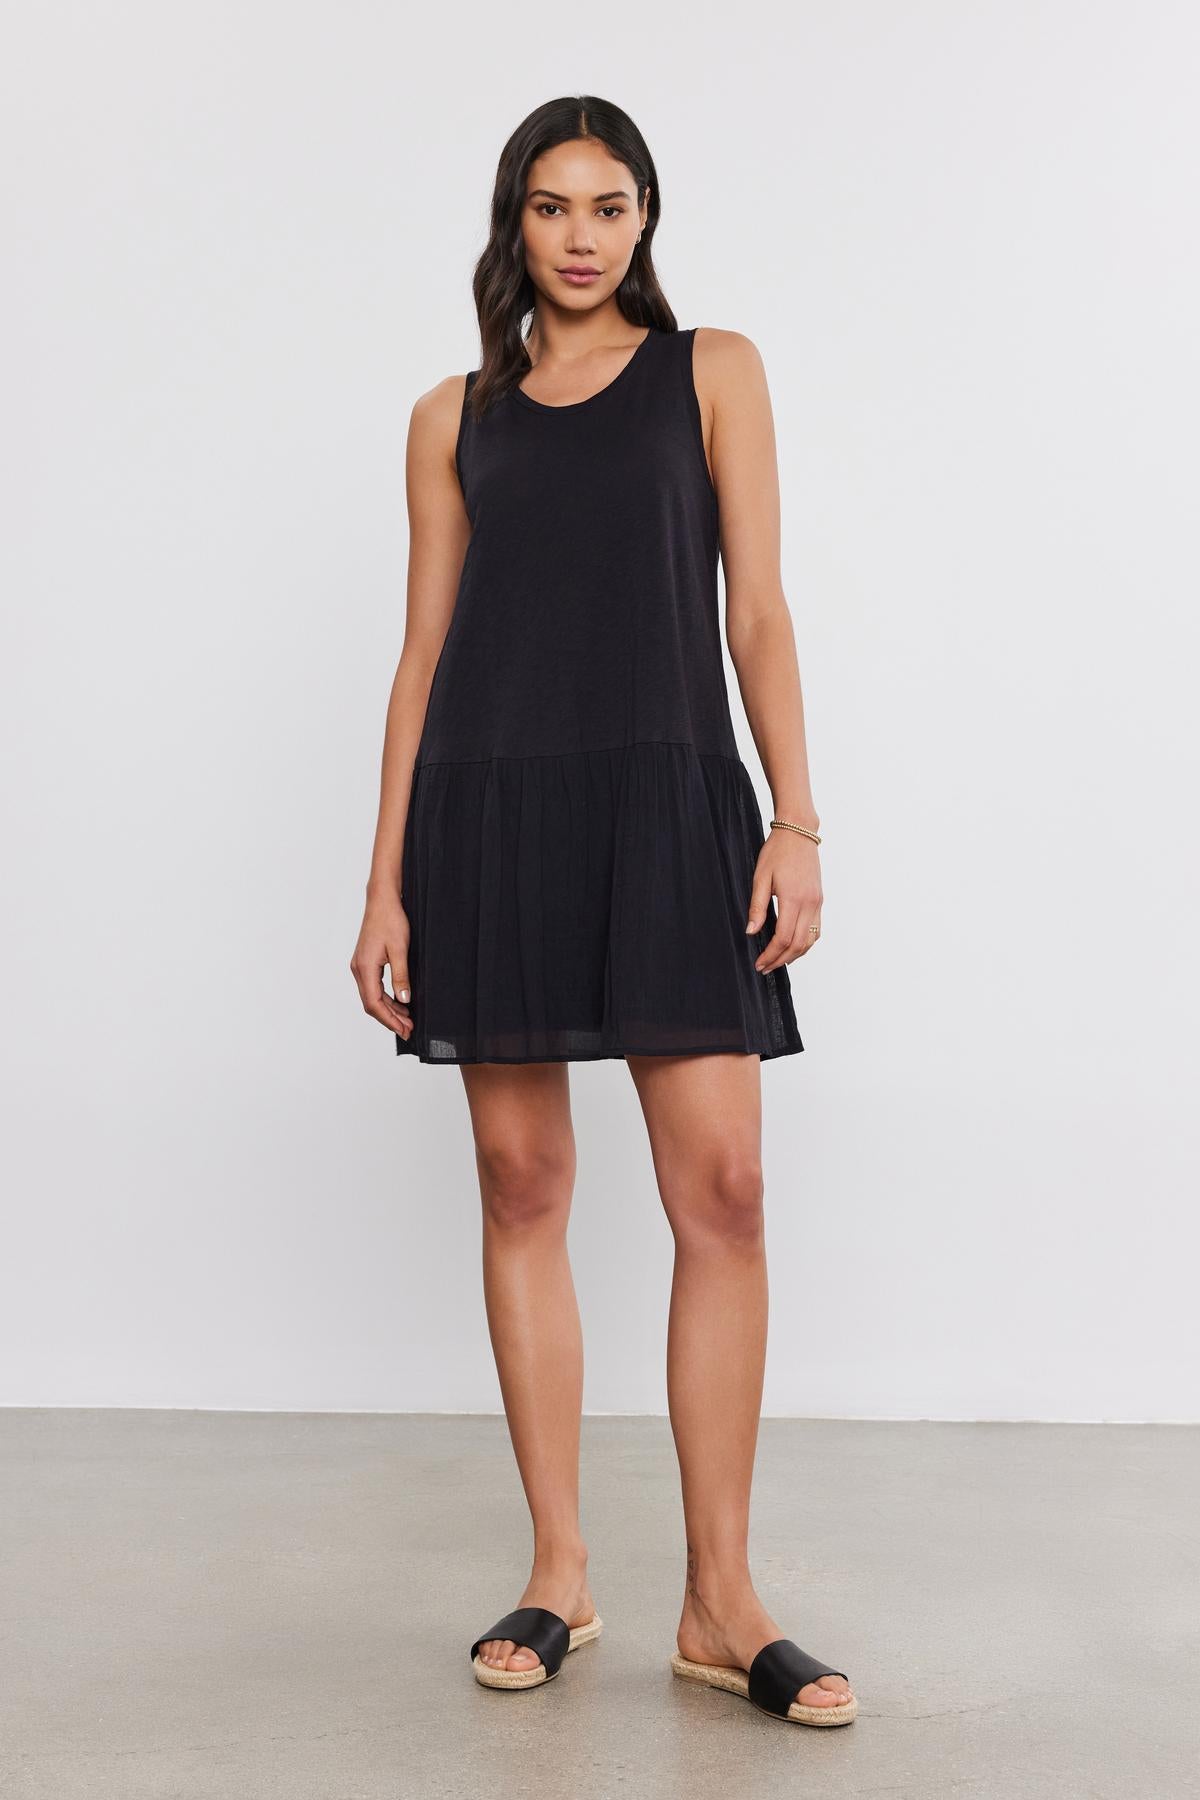 A woman in a sleeveless black Velvet by Graham & Spencer MINA DRESS with a tiered skirt and black sandals stands on a plain white background.-37054552375489